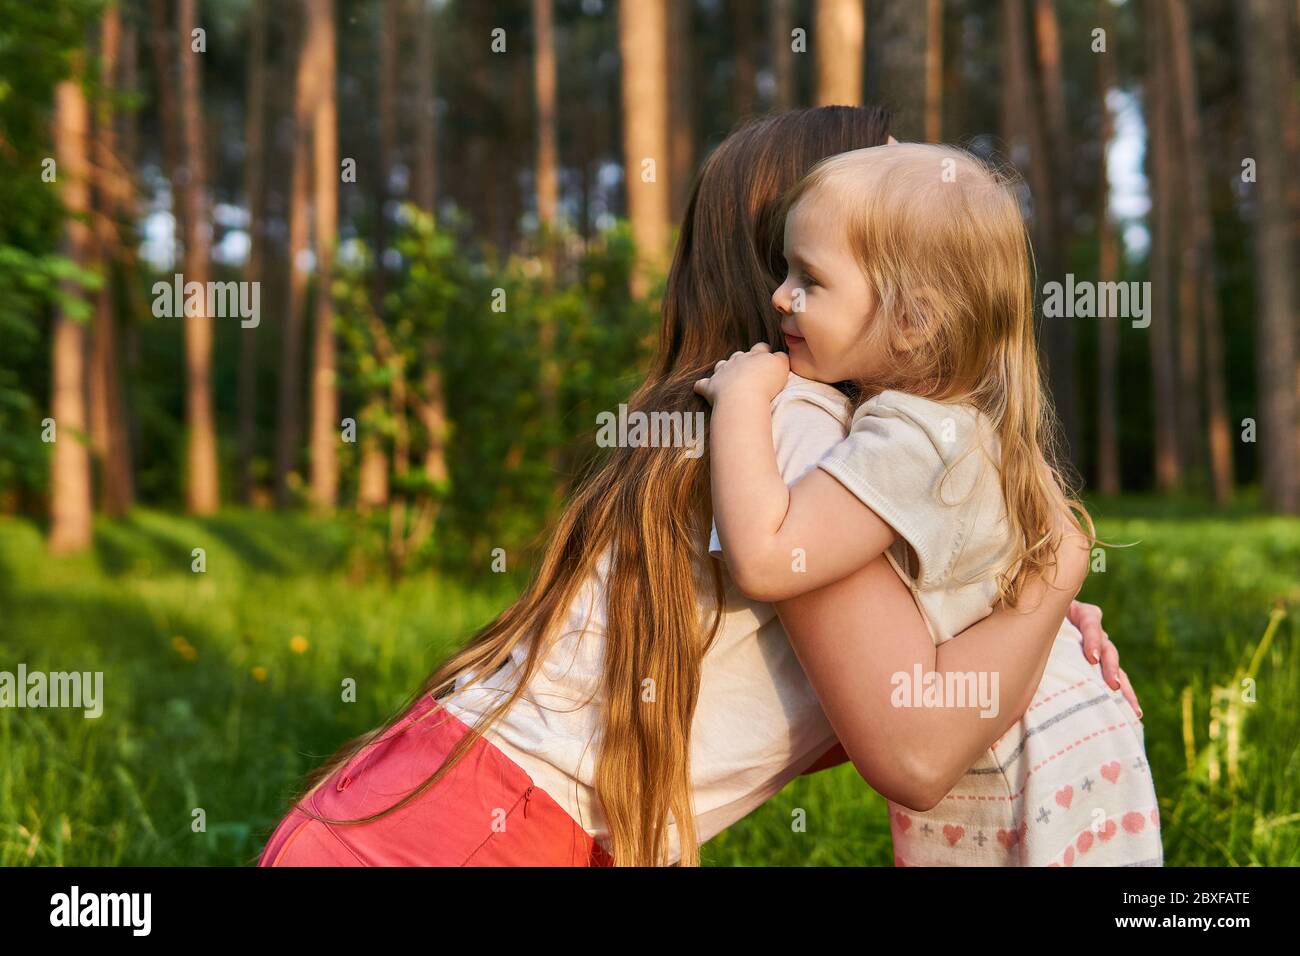 woman crouching affectionately hugs her toddler daughter outdoors in a park Stock Photo